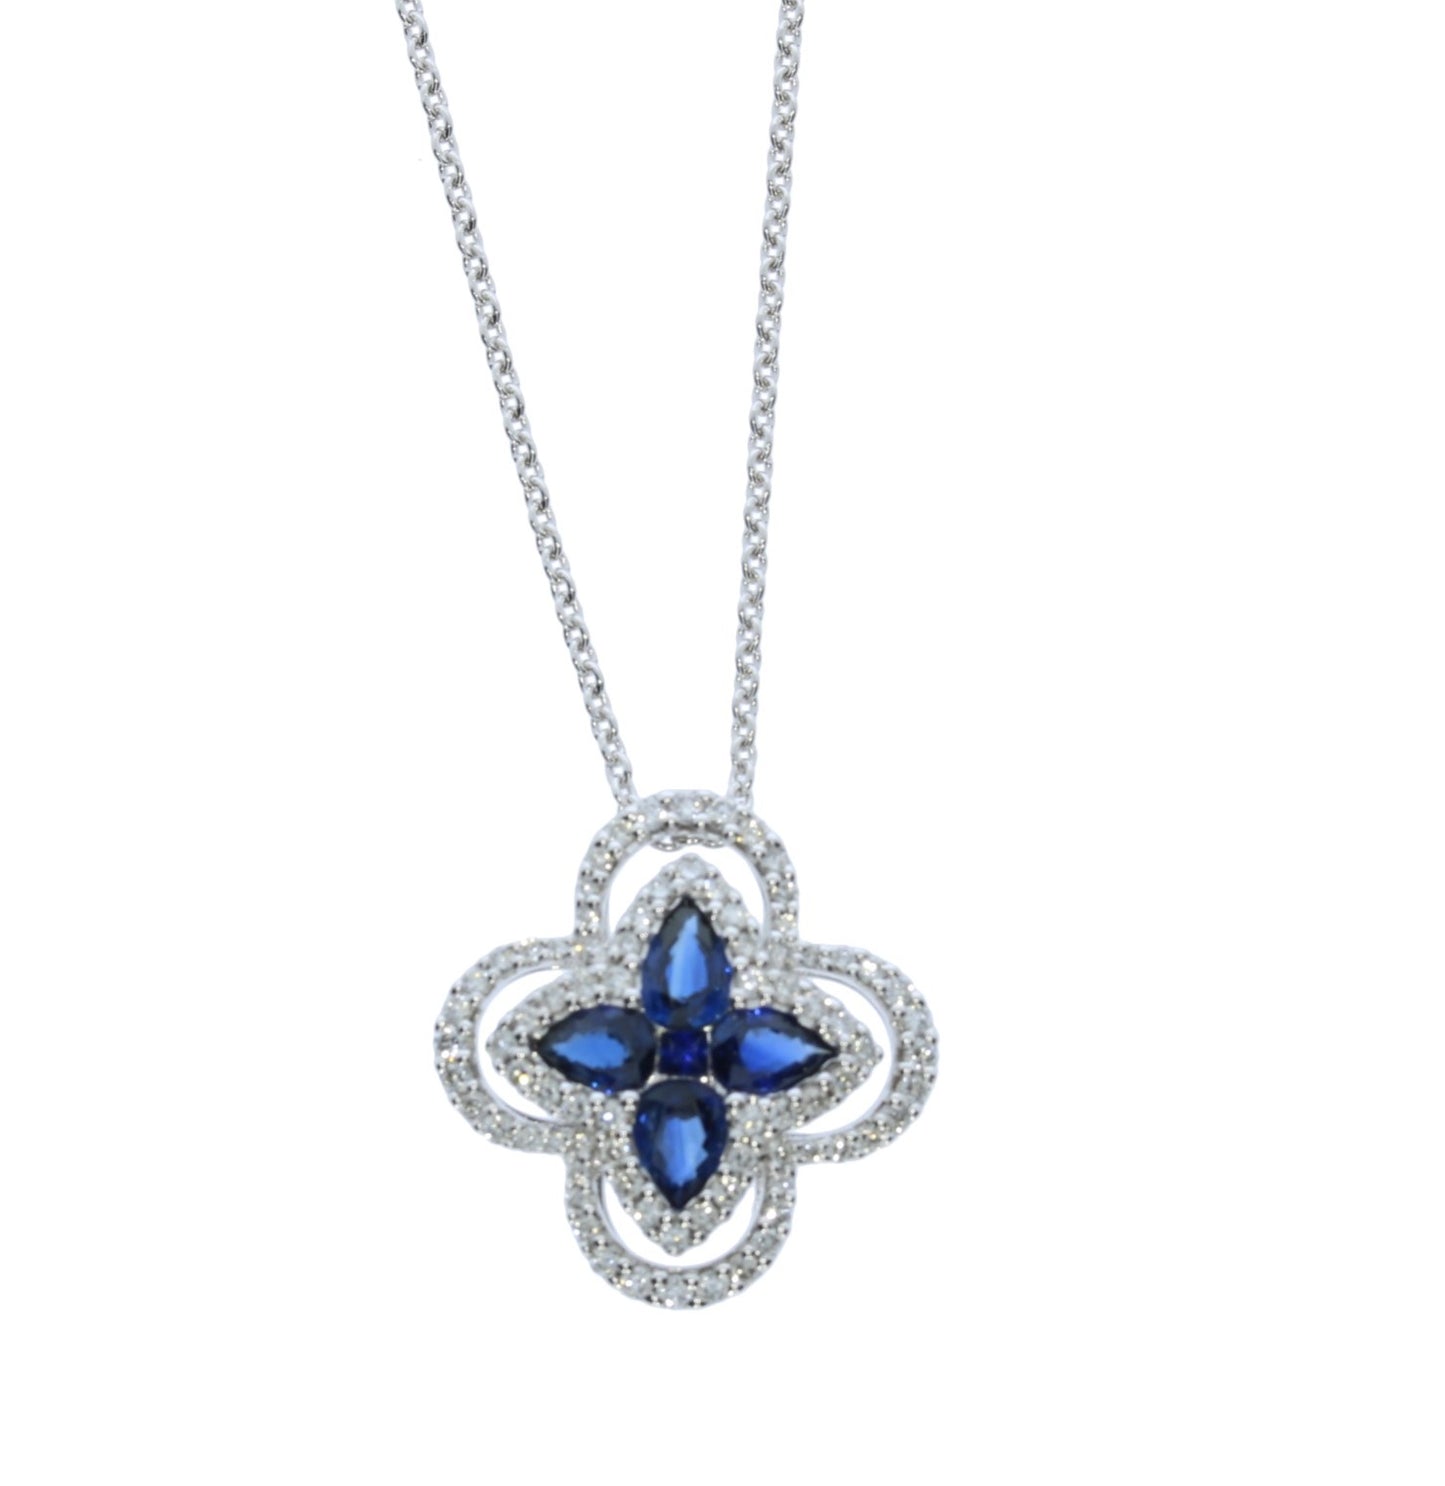 White Gold Sapphire and Diamond Necklace - Colored Stone Necklace